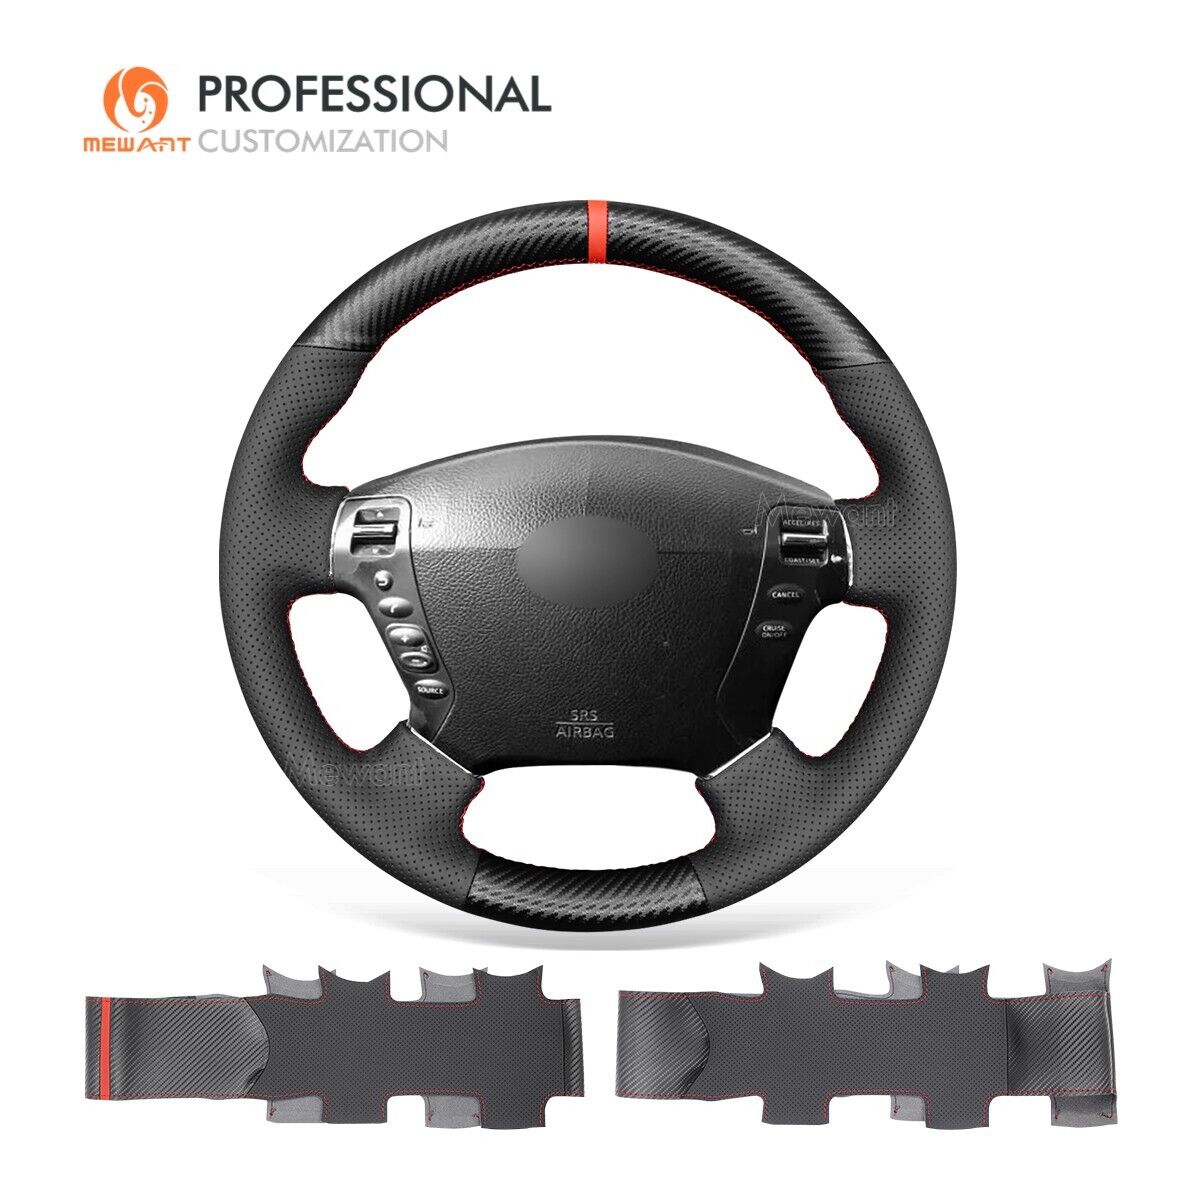 MEWANT  Real Leather PU Carbon Fiber Steering Wheel Cover for Nissan Fuga Cima